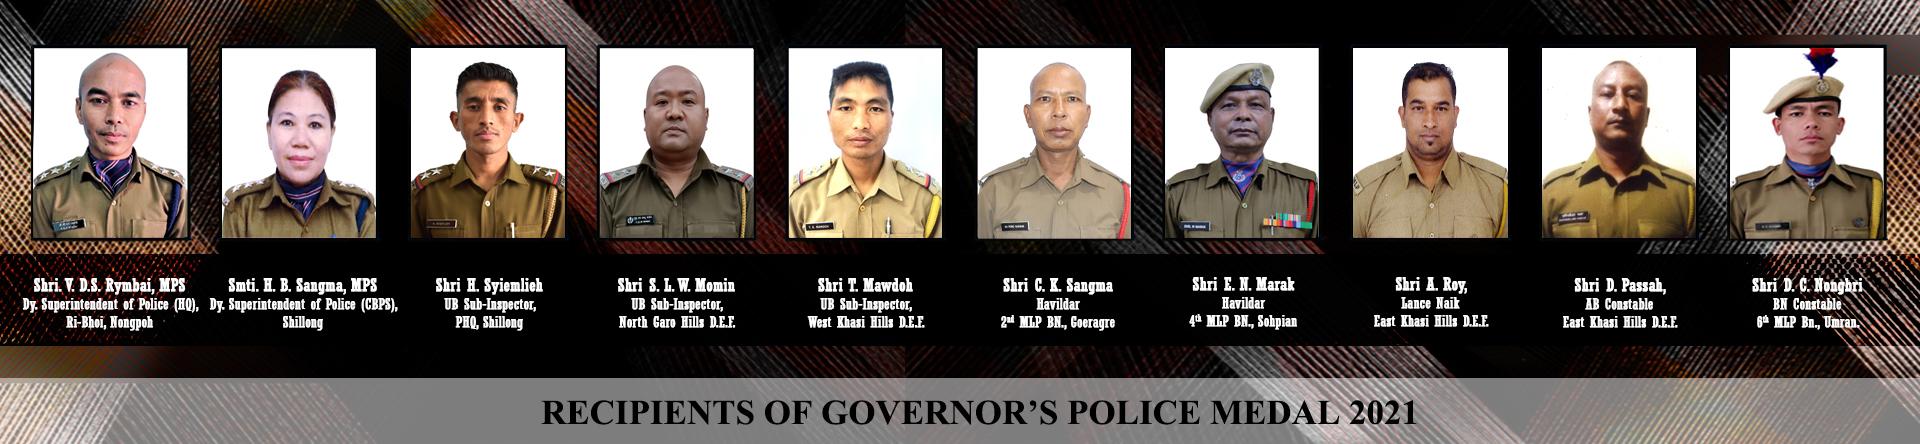 Recipients of Governors Police Medal 2021